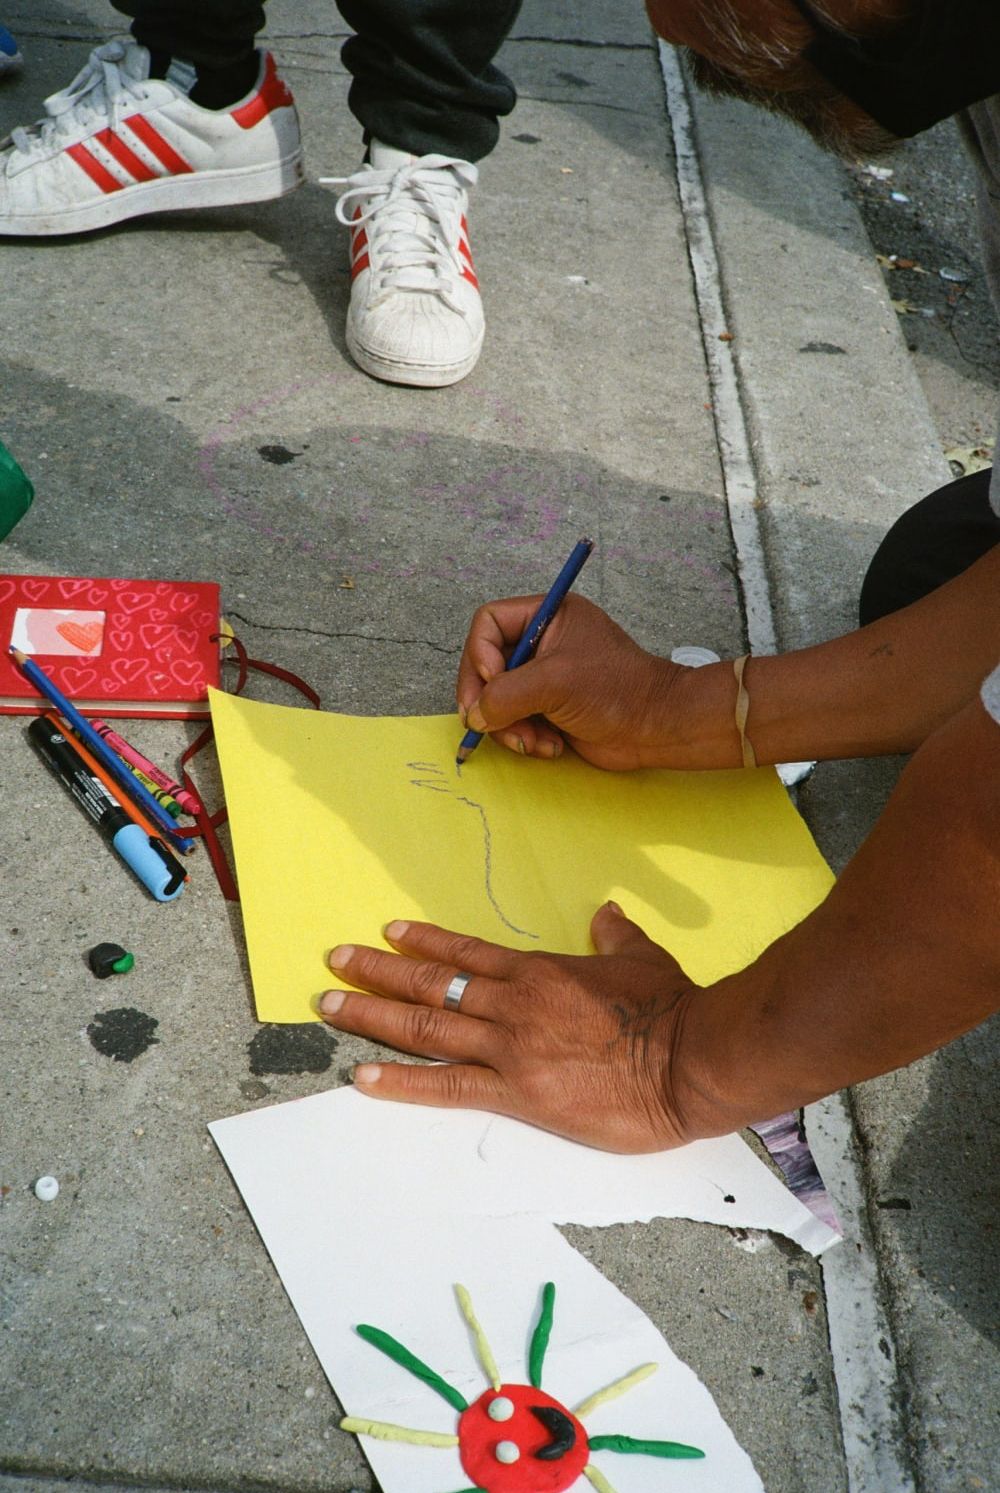 Photograph of a pair of hands drawing on yellow paper placed on the concrete ground. Next to the paper are pens, a plasticine image of the sun and another person’s feet wearing trainers.